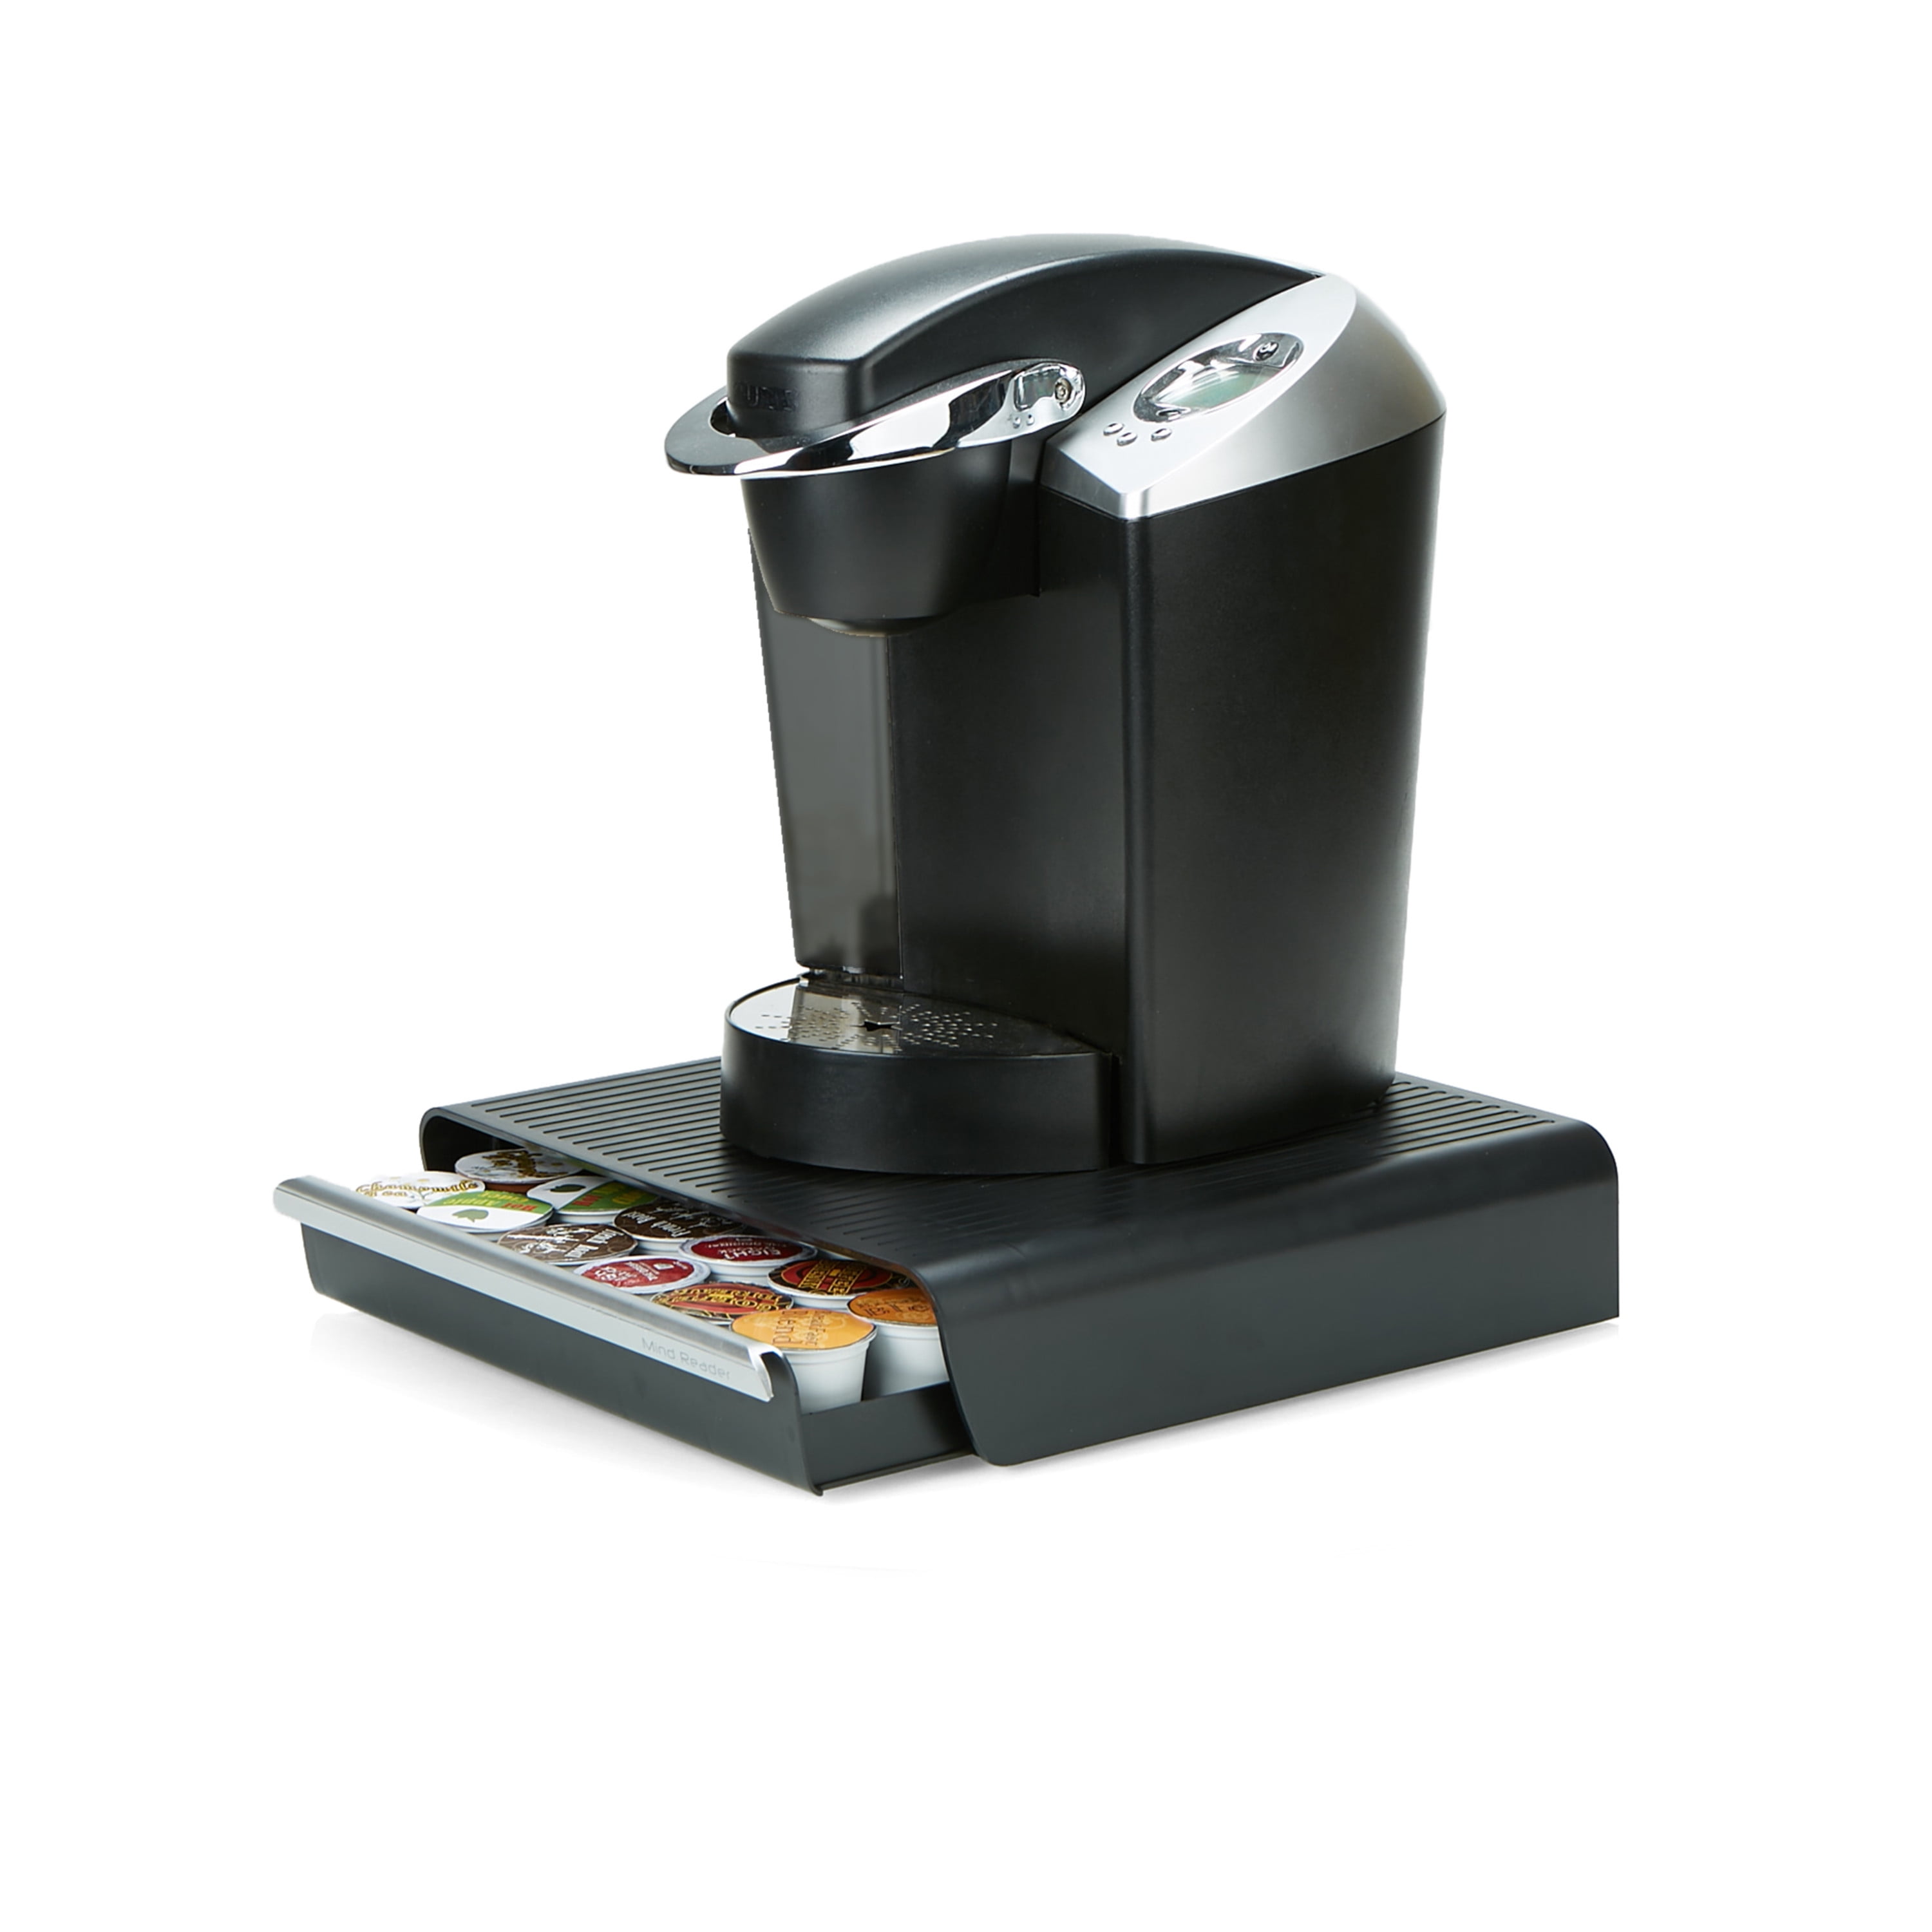 Counter-top Space-Saving EVERIE Stackable Extendable Coffee Pod Holder Drawer Compatible with 36 K Cup Pods Under Keurig/Cabinet Available